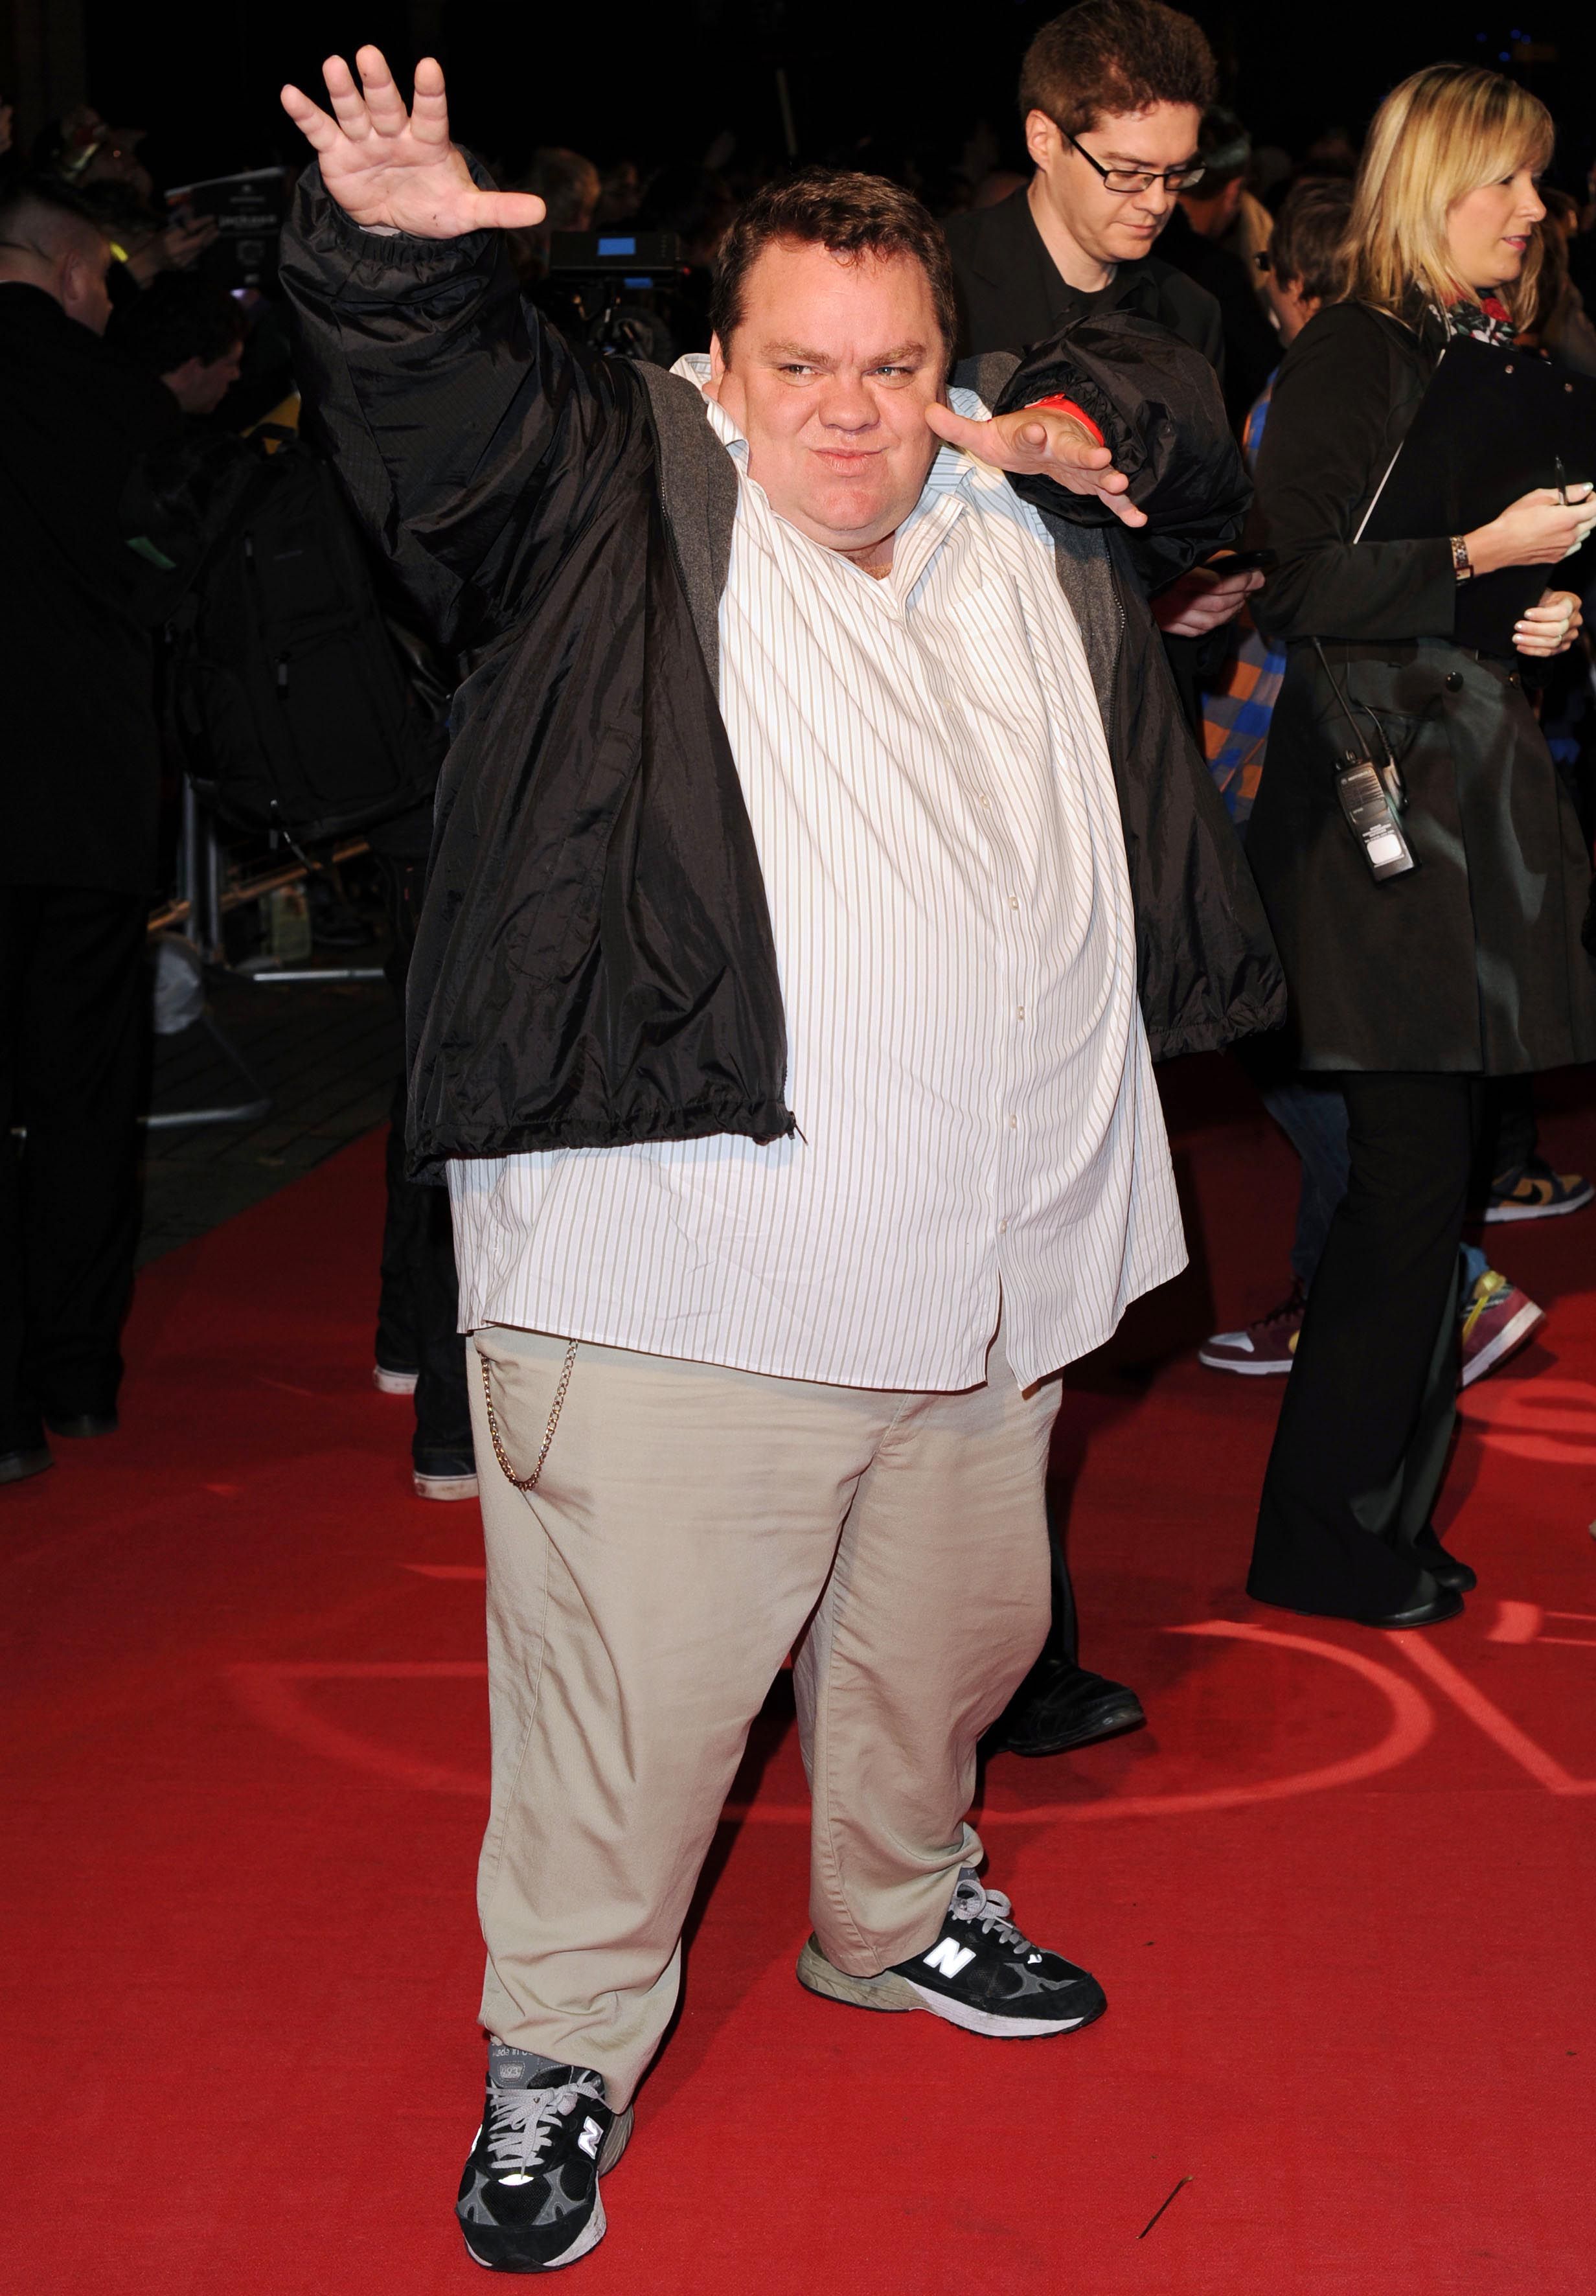 Preston Lacy at the Jackass 3D premiere